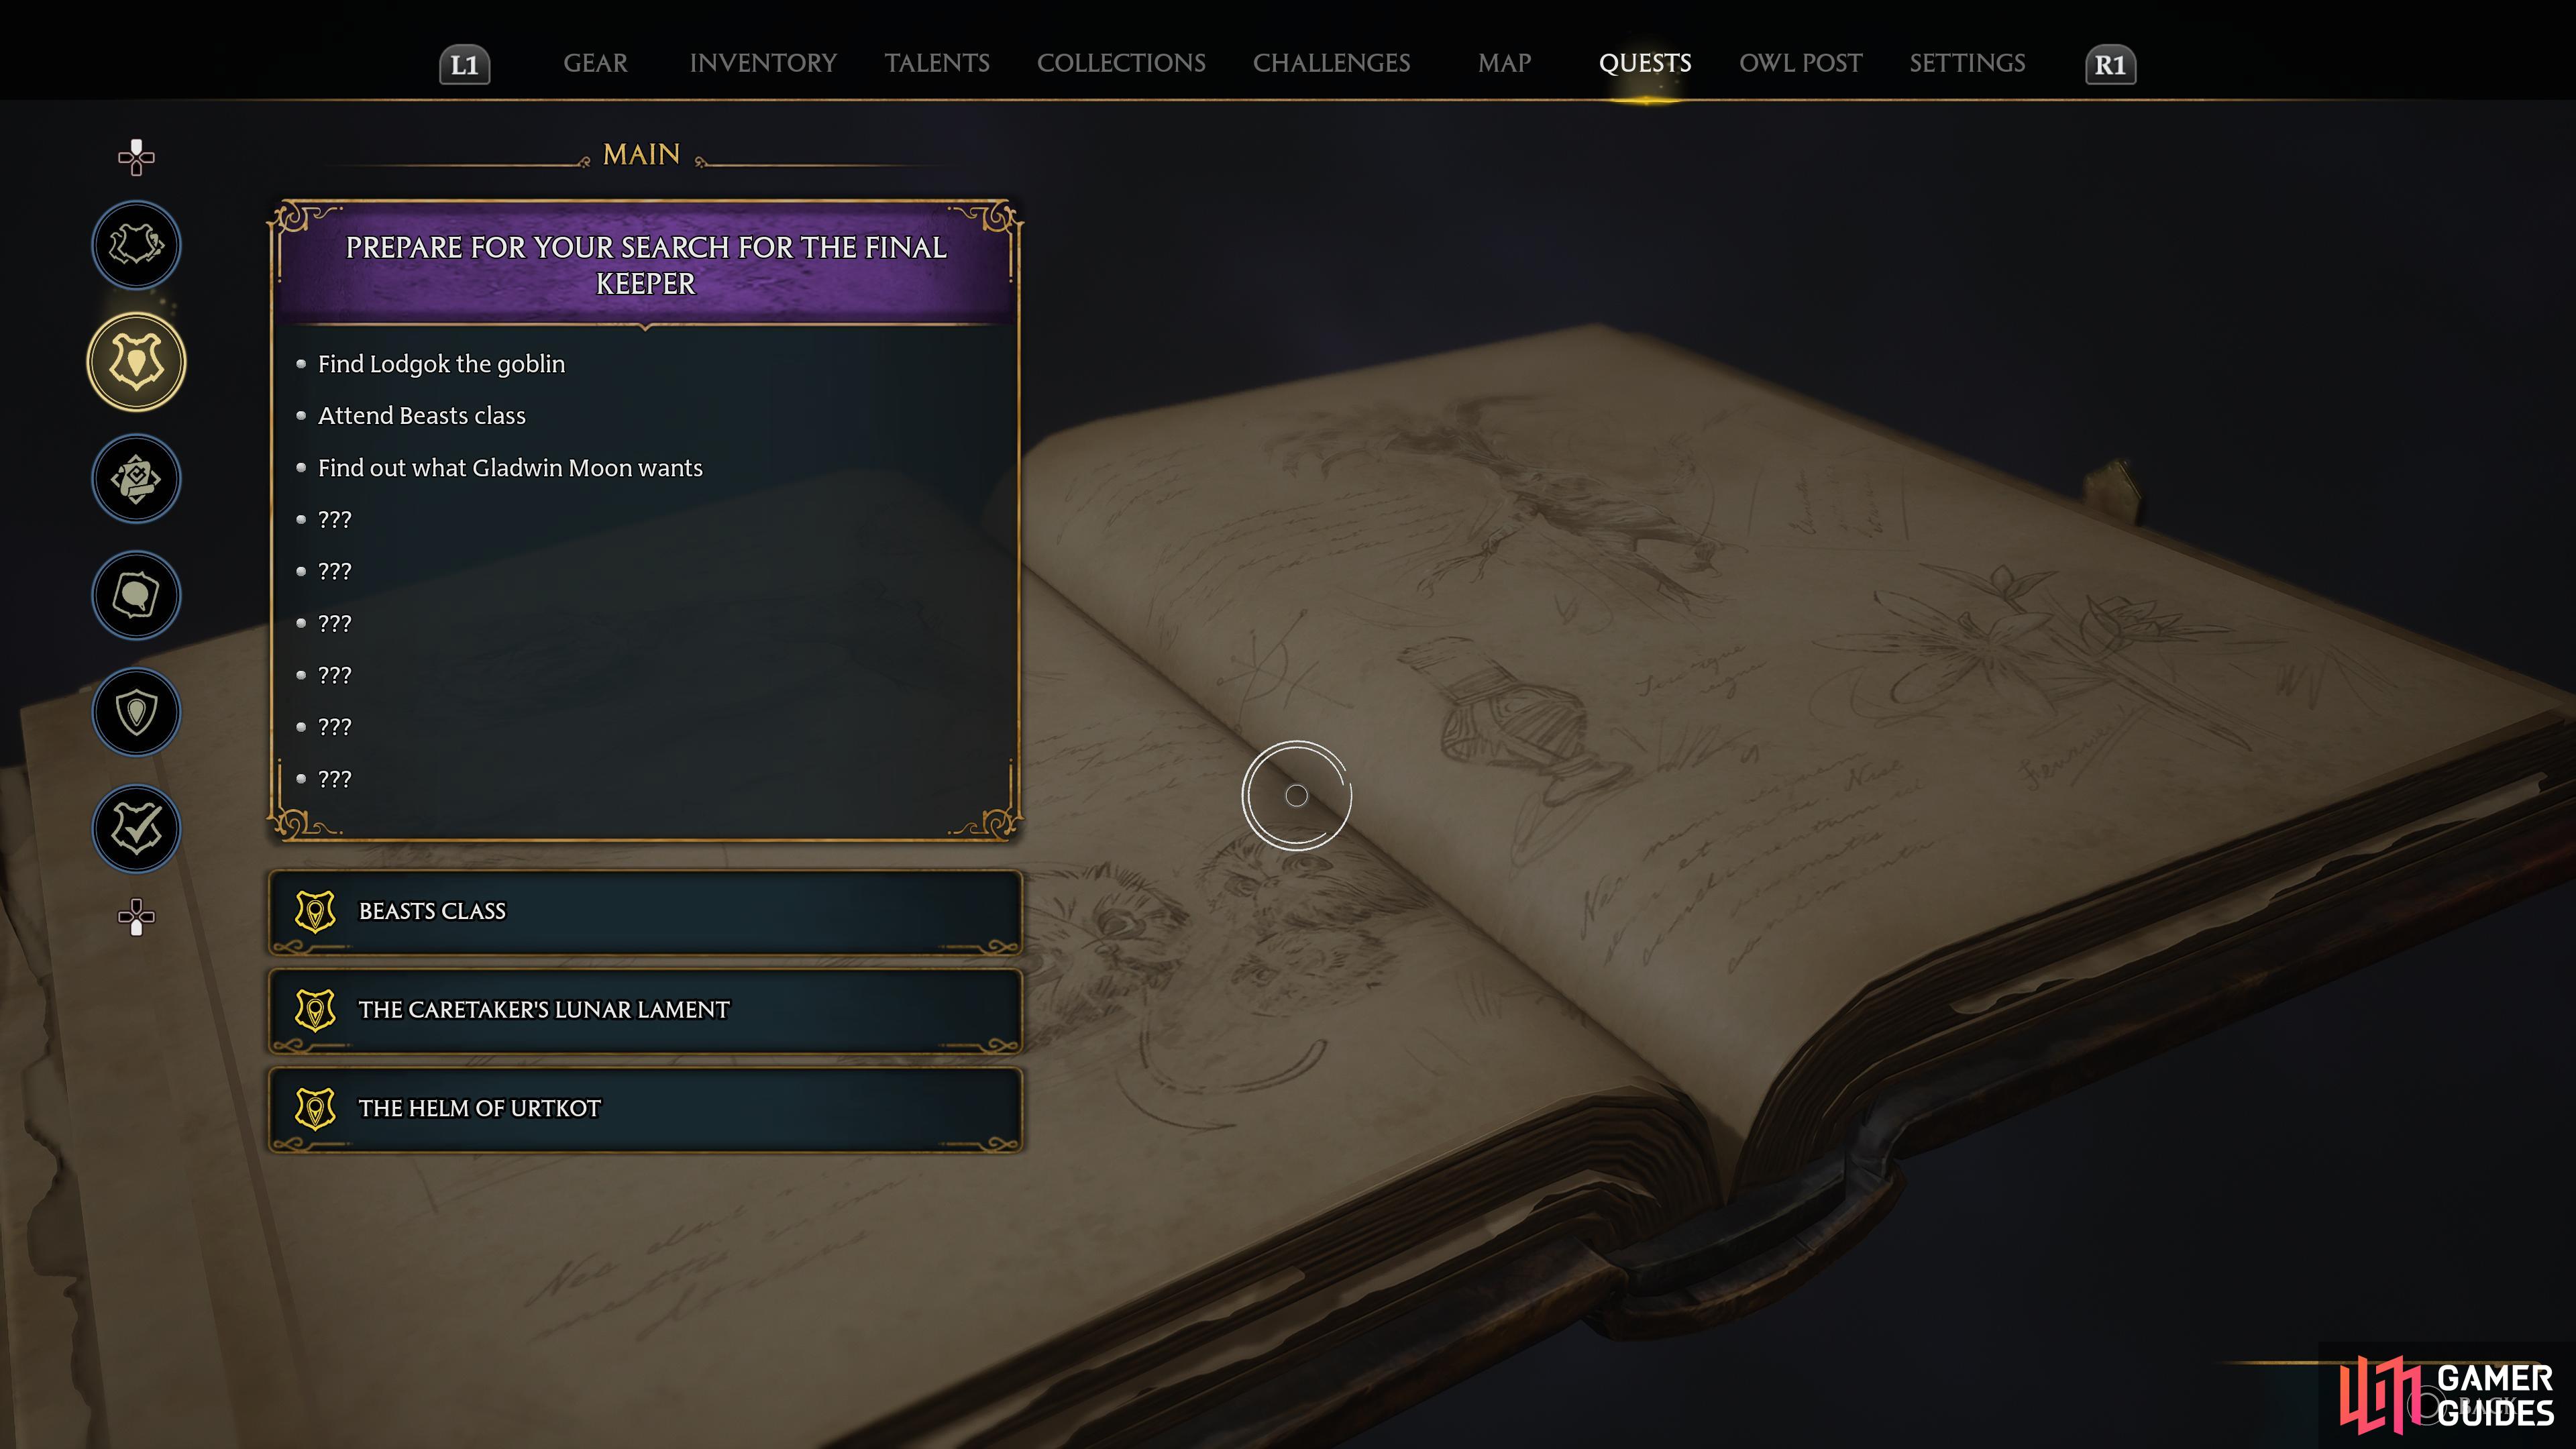 You can find your Side Quests via the Menu.